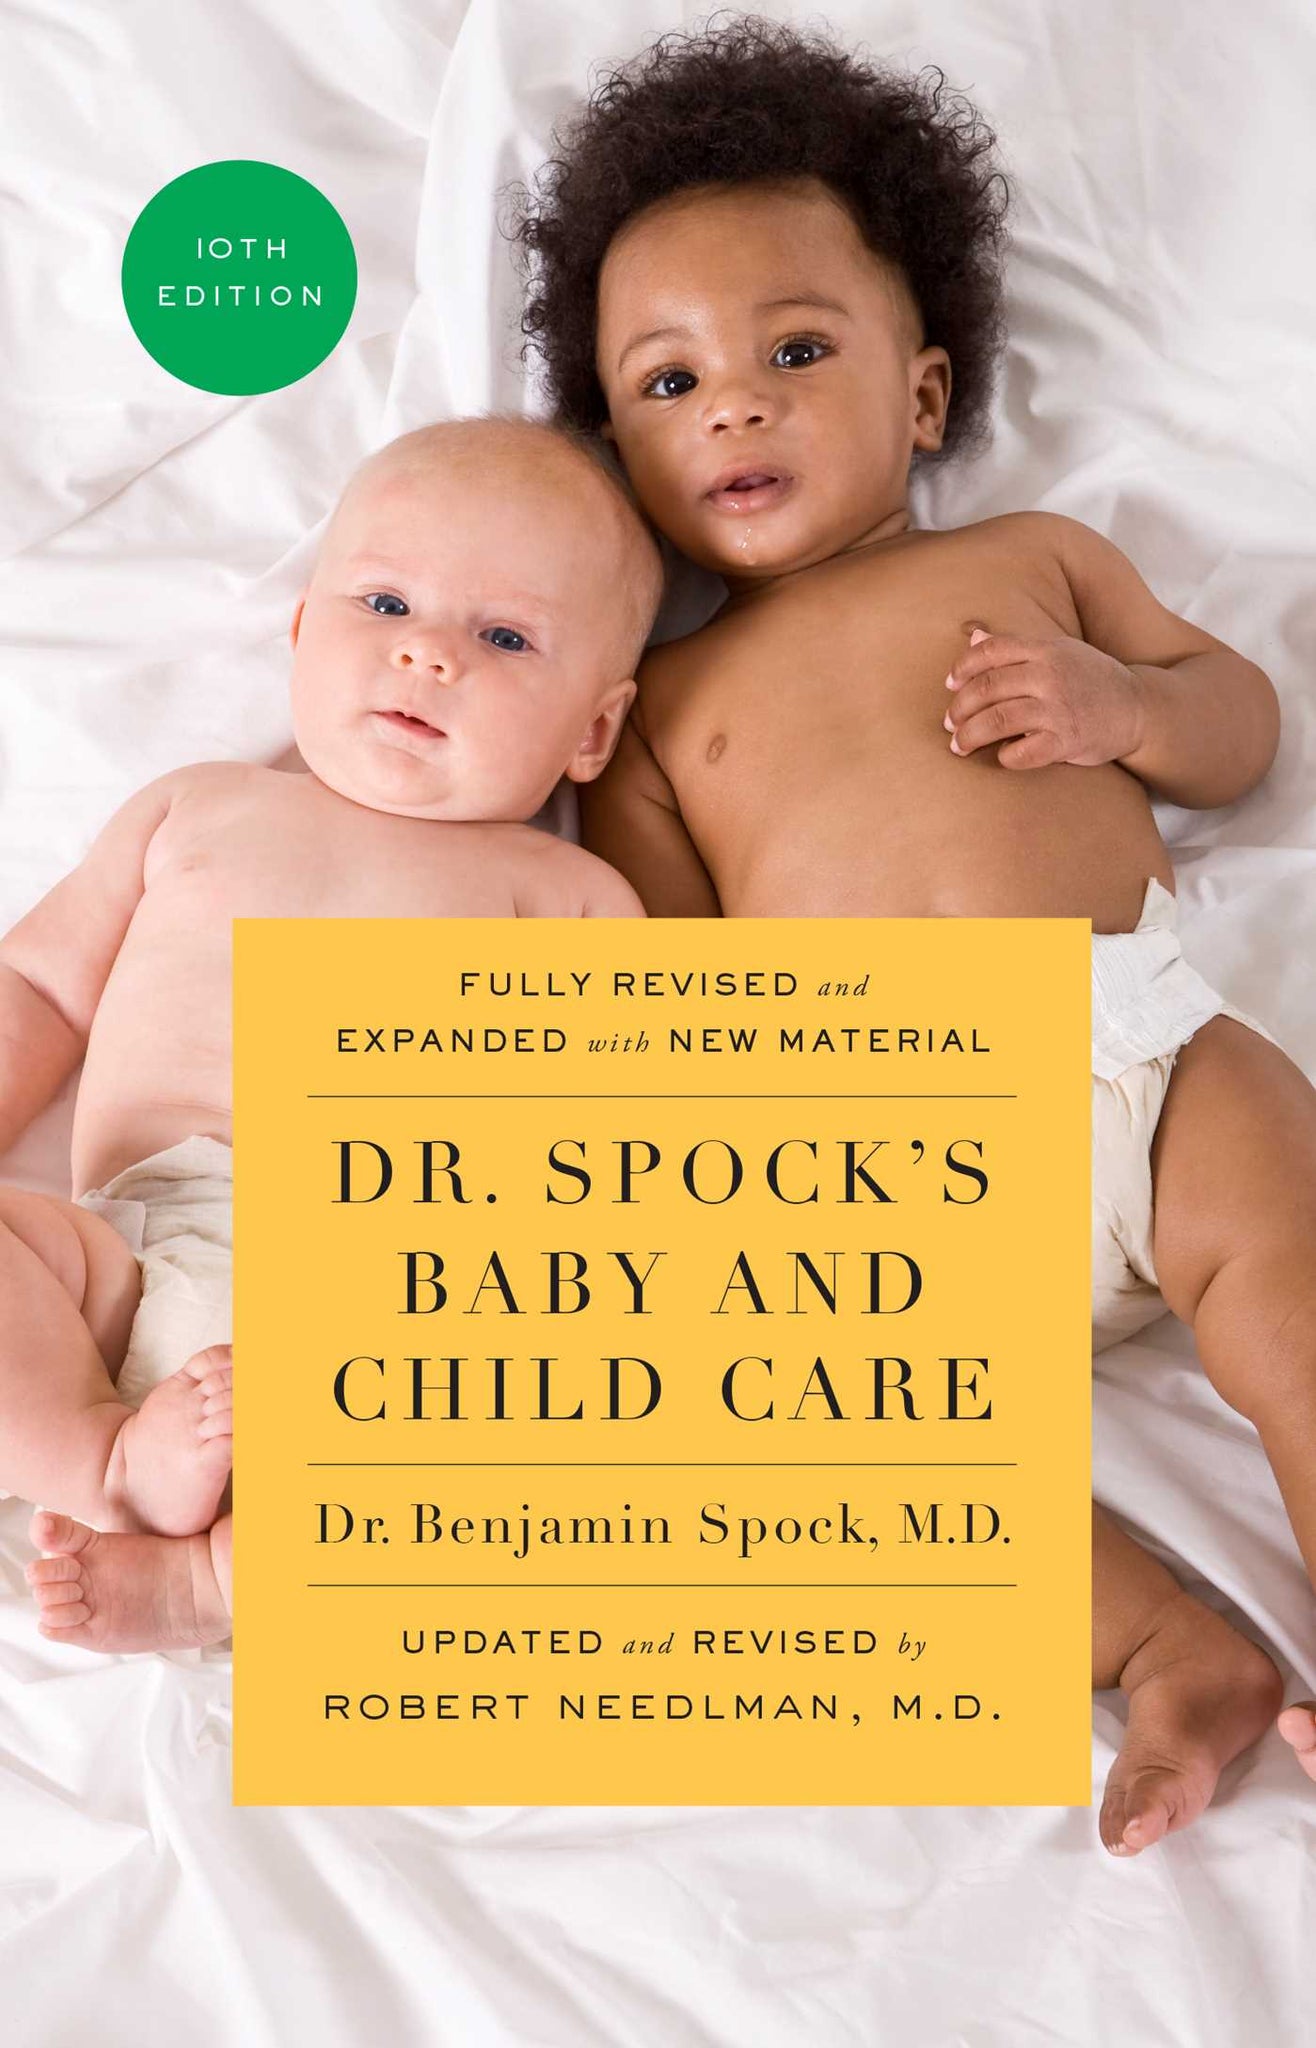 Dr. Spock's Baby and Child Care, 10th edition